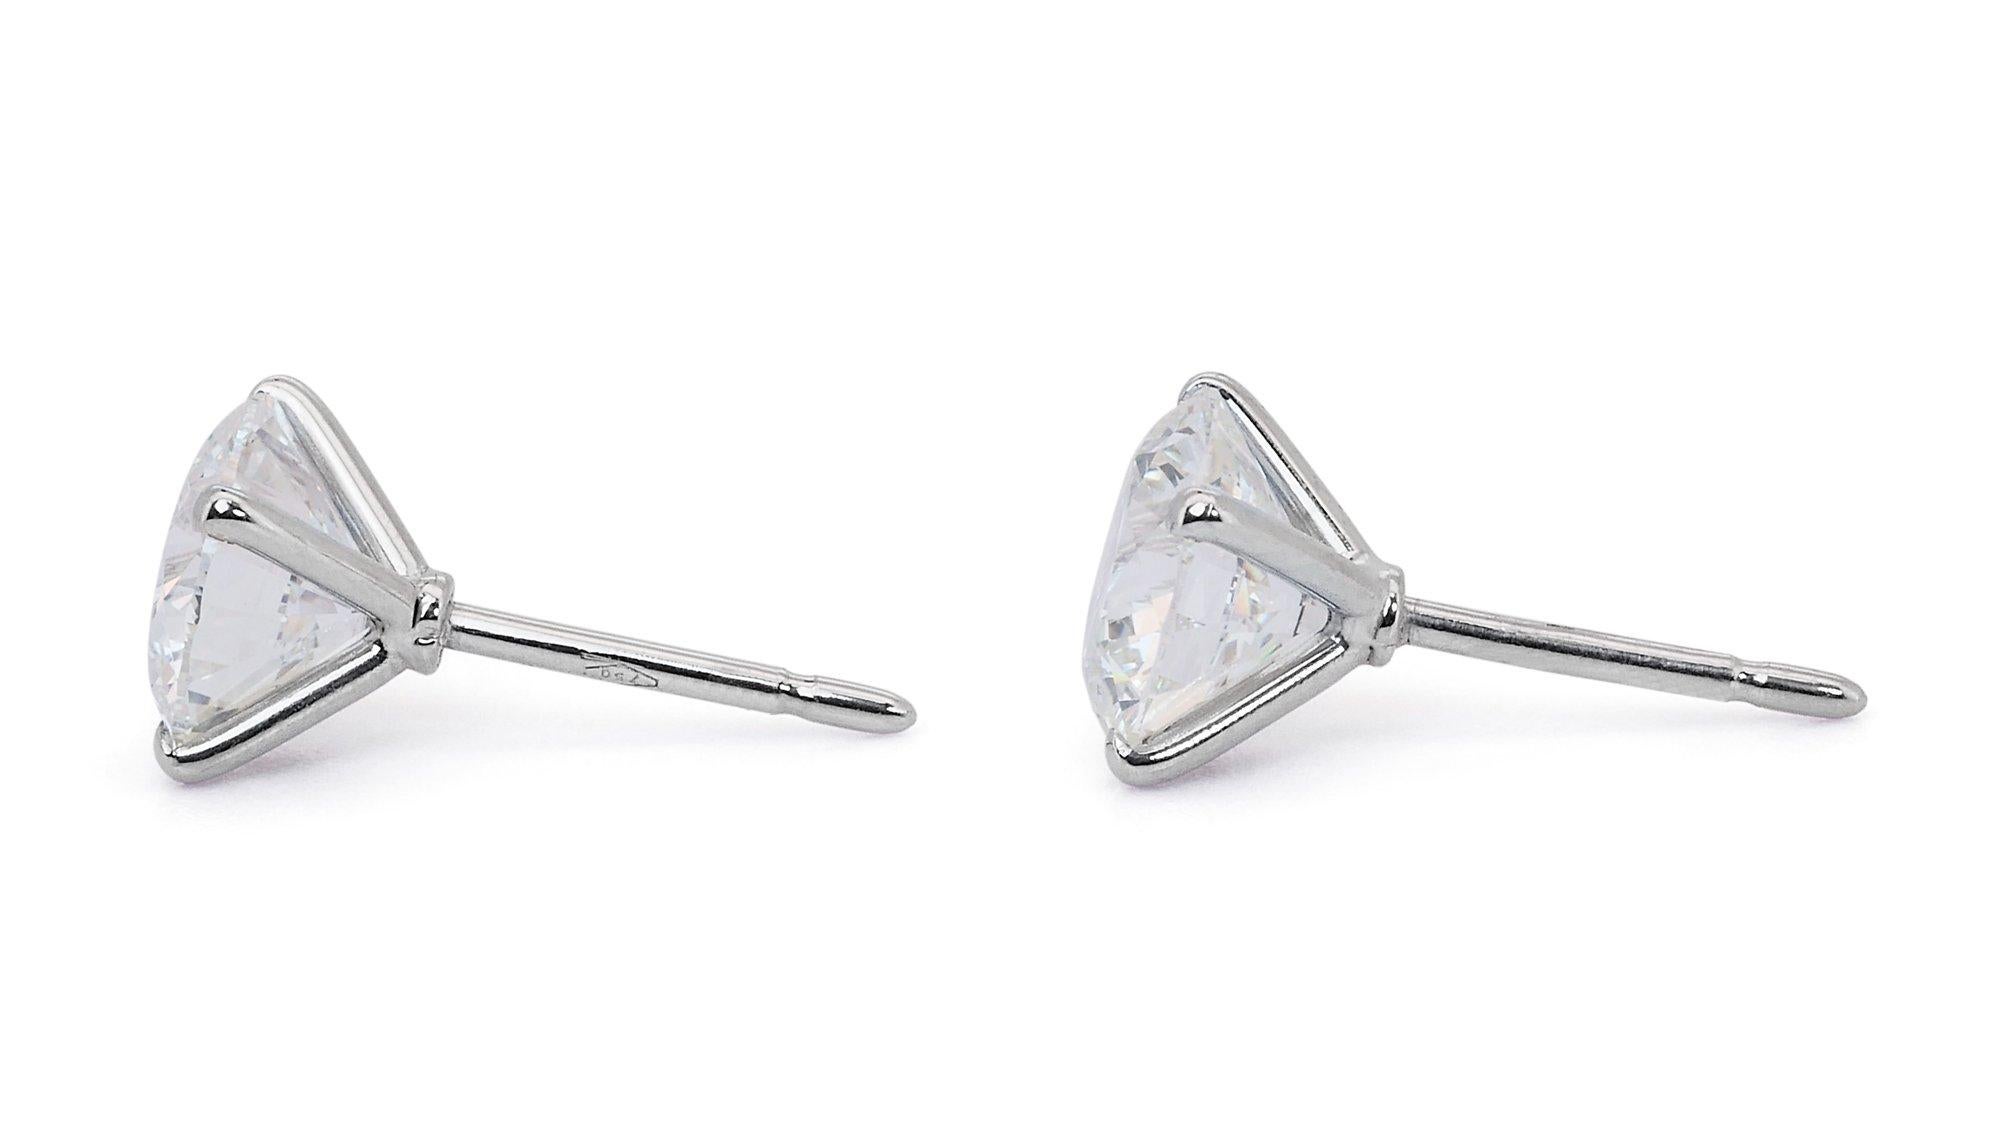 Sparkling 18k White Gold Stud Earrings with 3.13ct Natural Diamonds GIA Cert For Sale 3